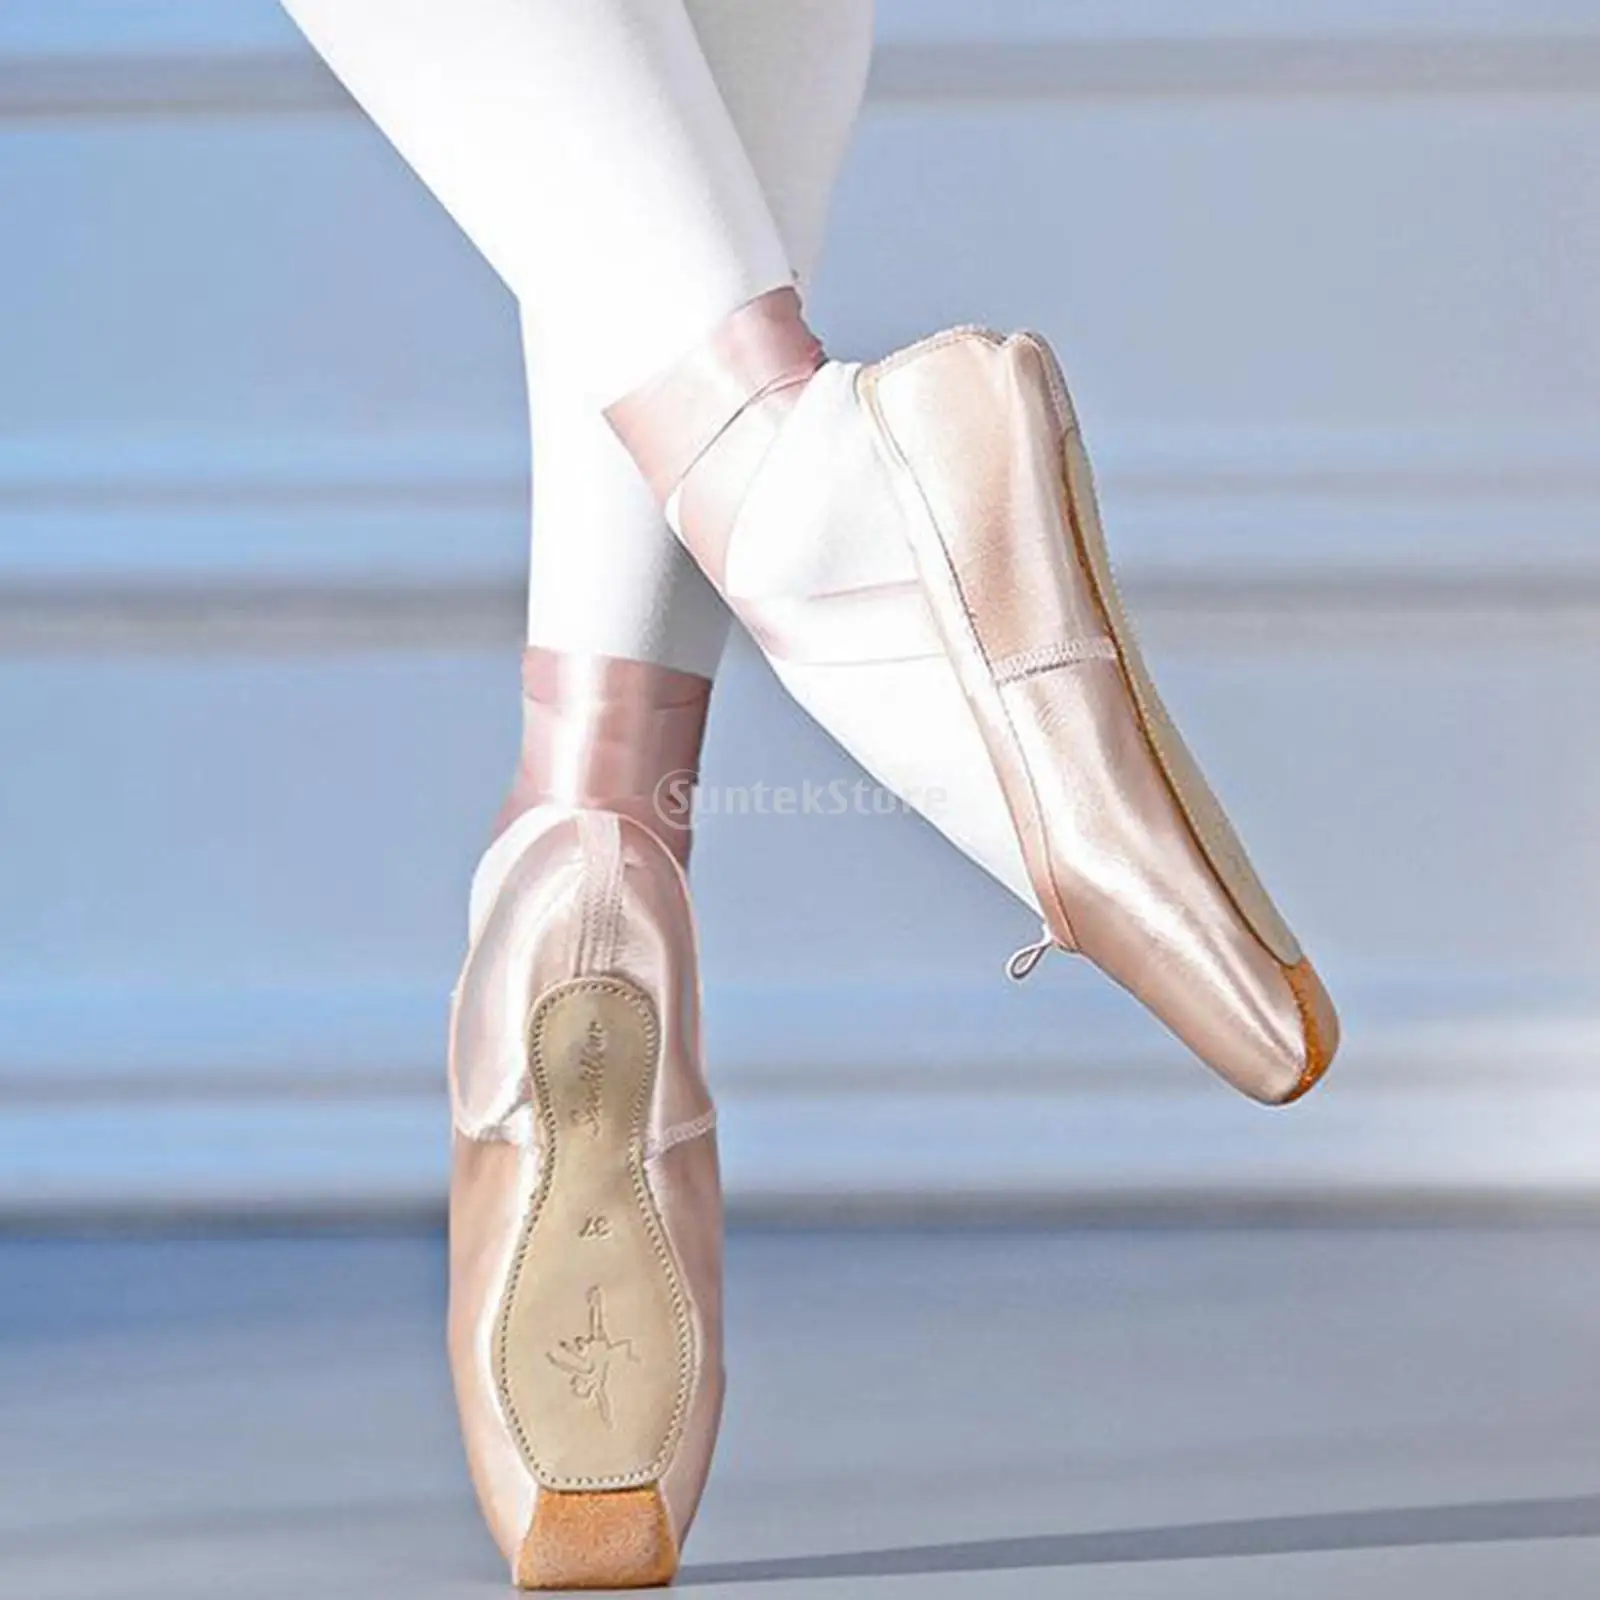 girls-ballet-pointe-shoes-professional-ballerina-practise-soft-satin-canvas-ballet-shoes-with-ribbons